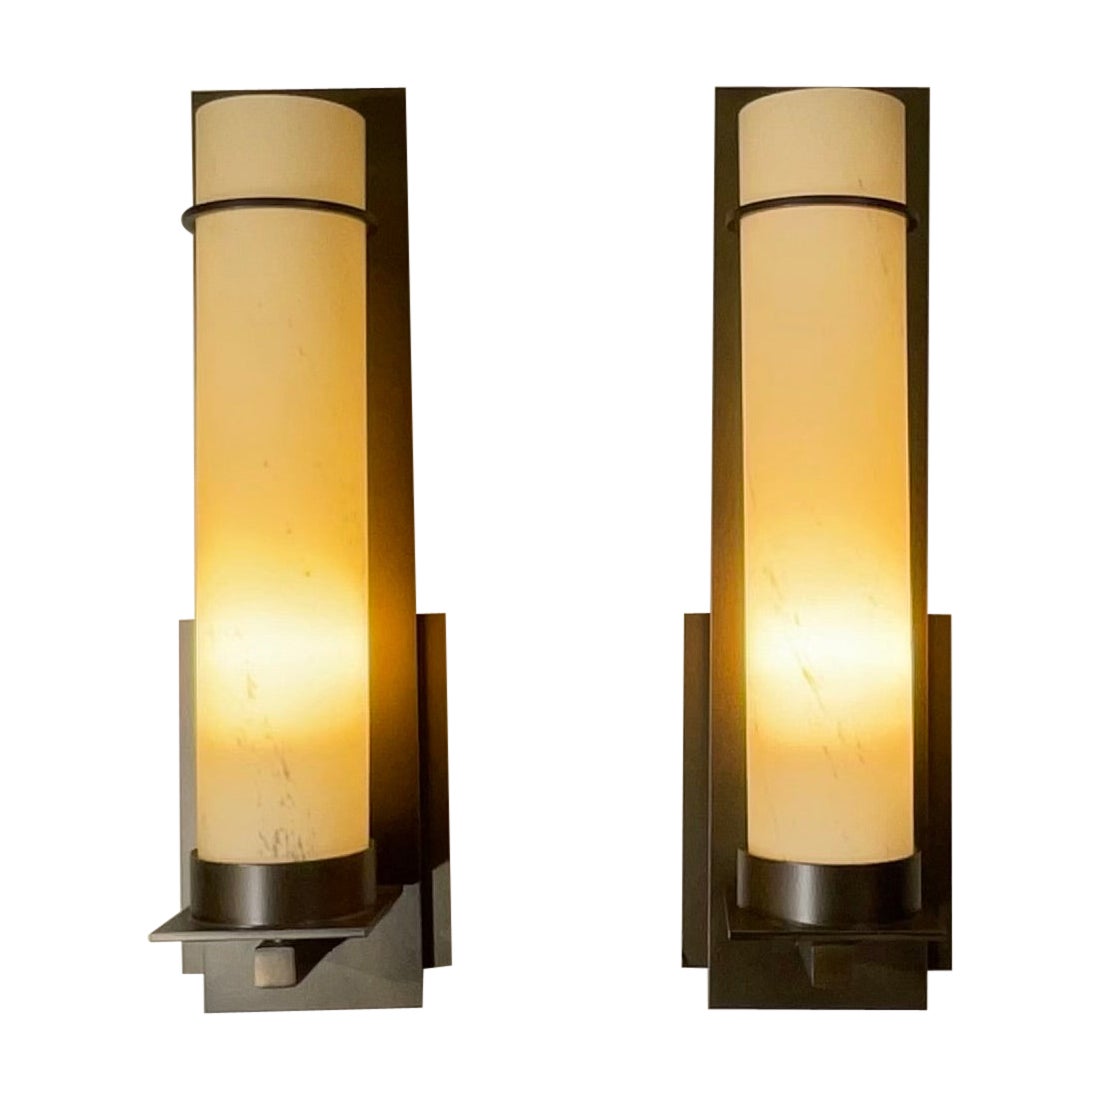 Pair Of After Hours Indoor Wall Sconces By Hubbardton Forge  For Sale